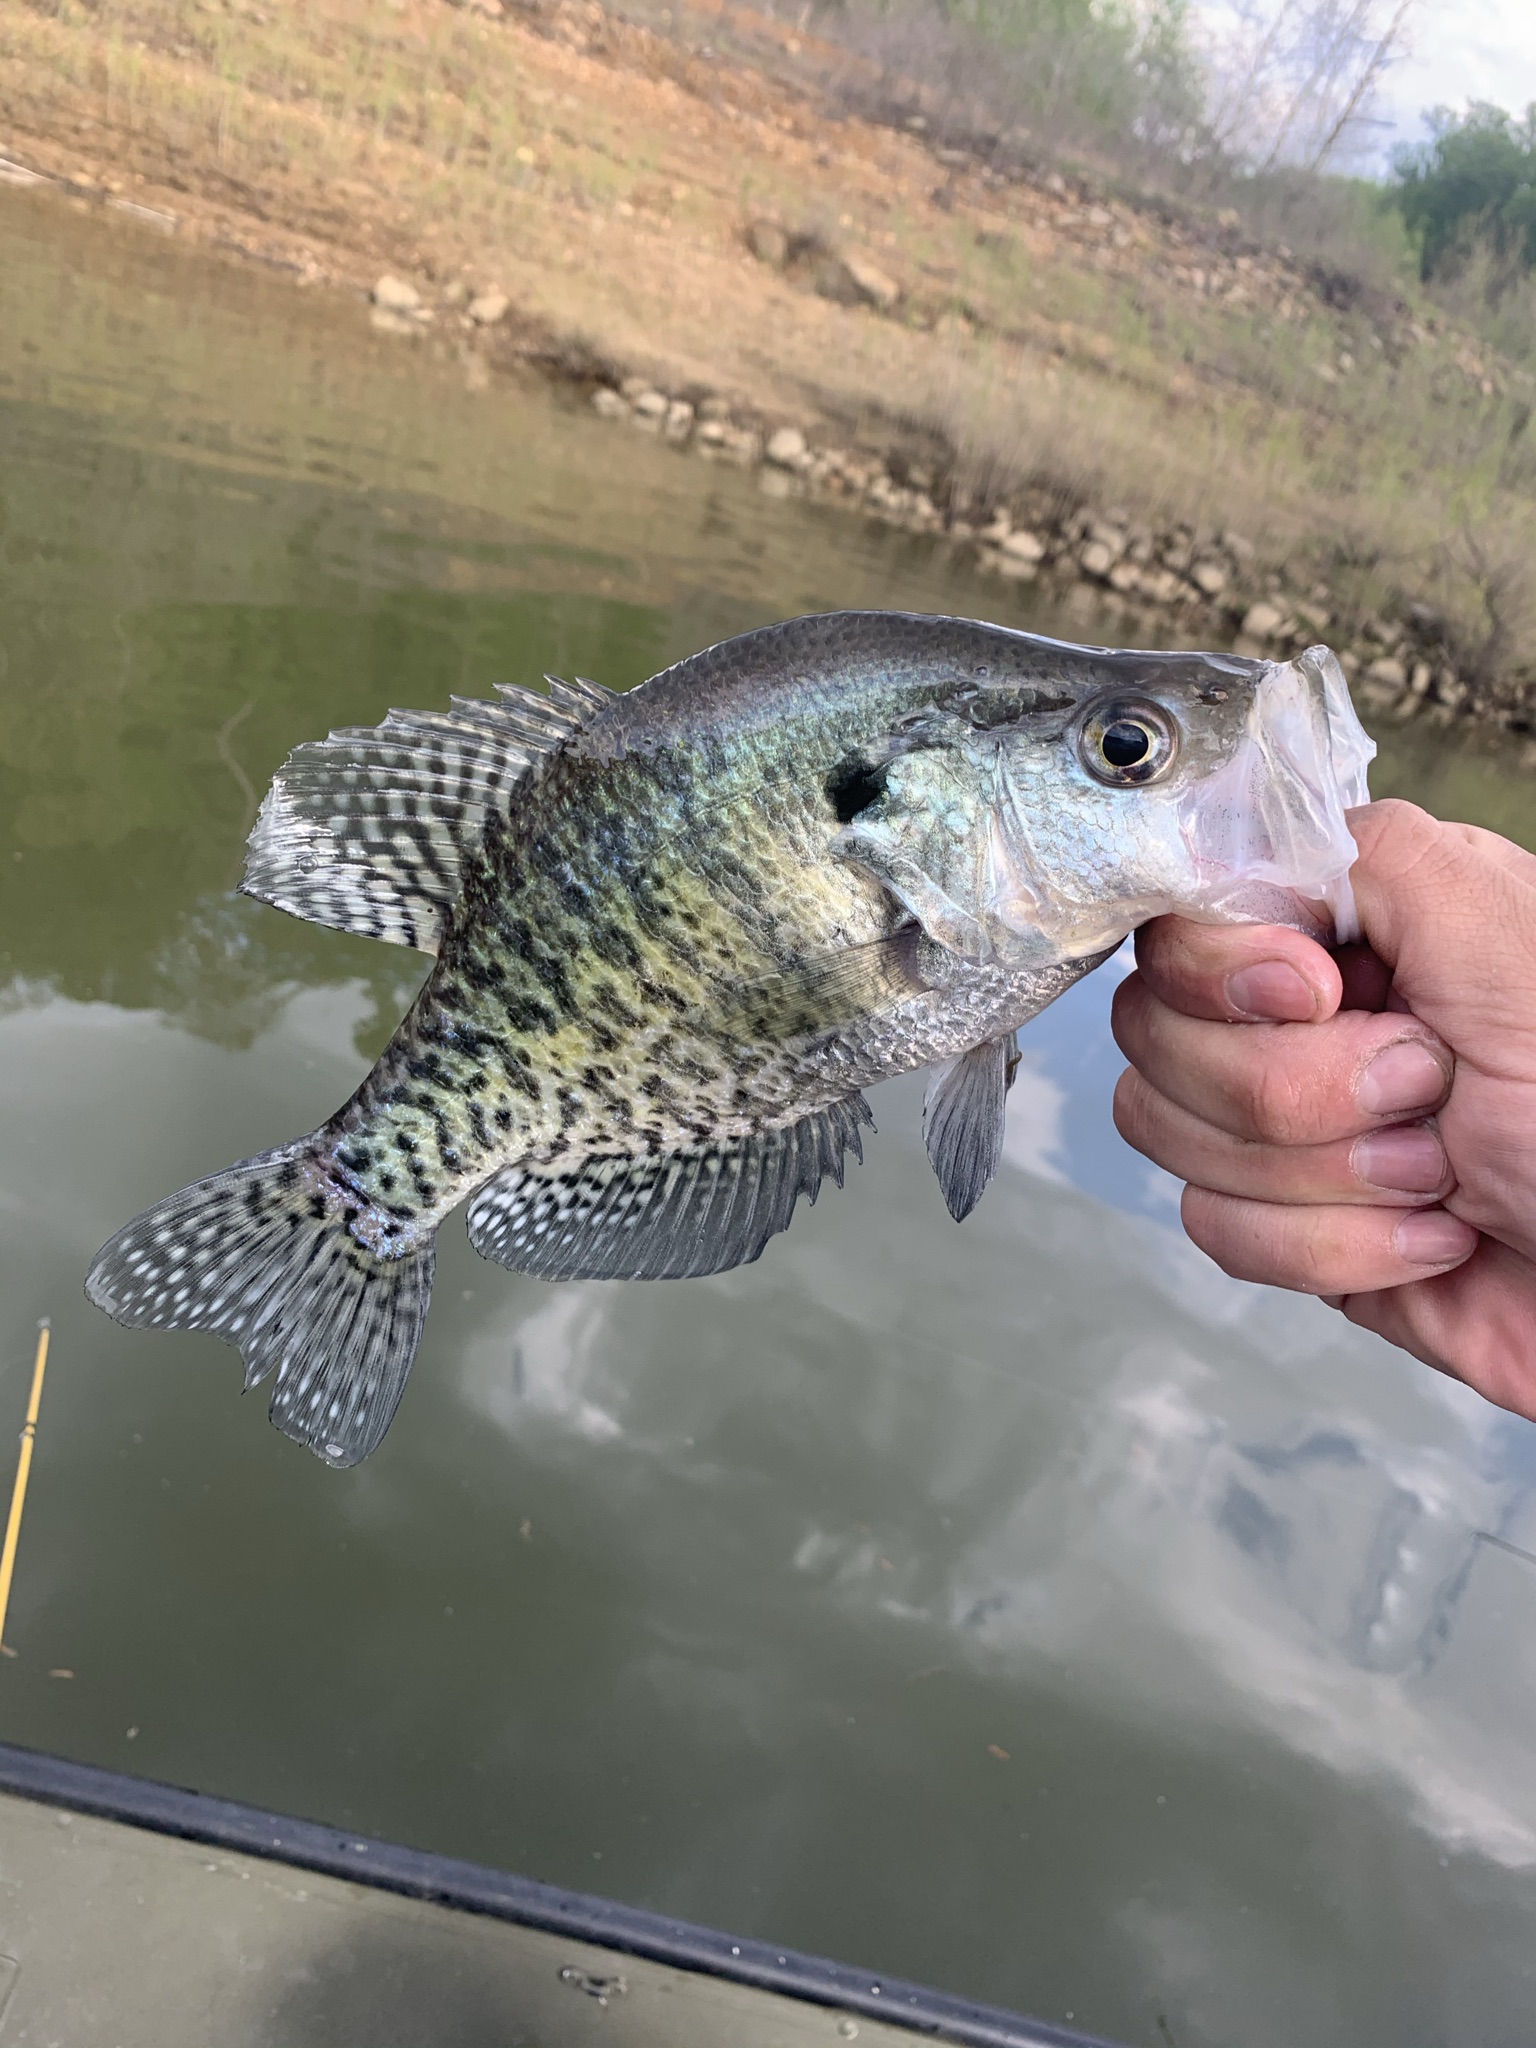 A Brilliant Method For Catching More Crappie - Stream and Timber